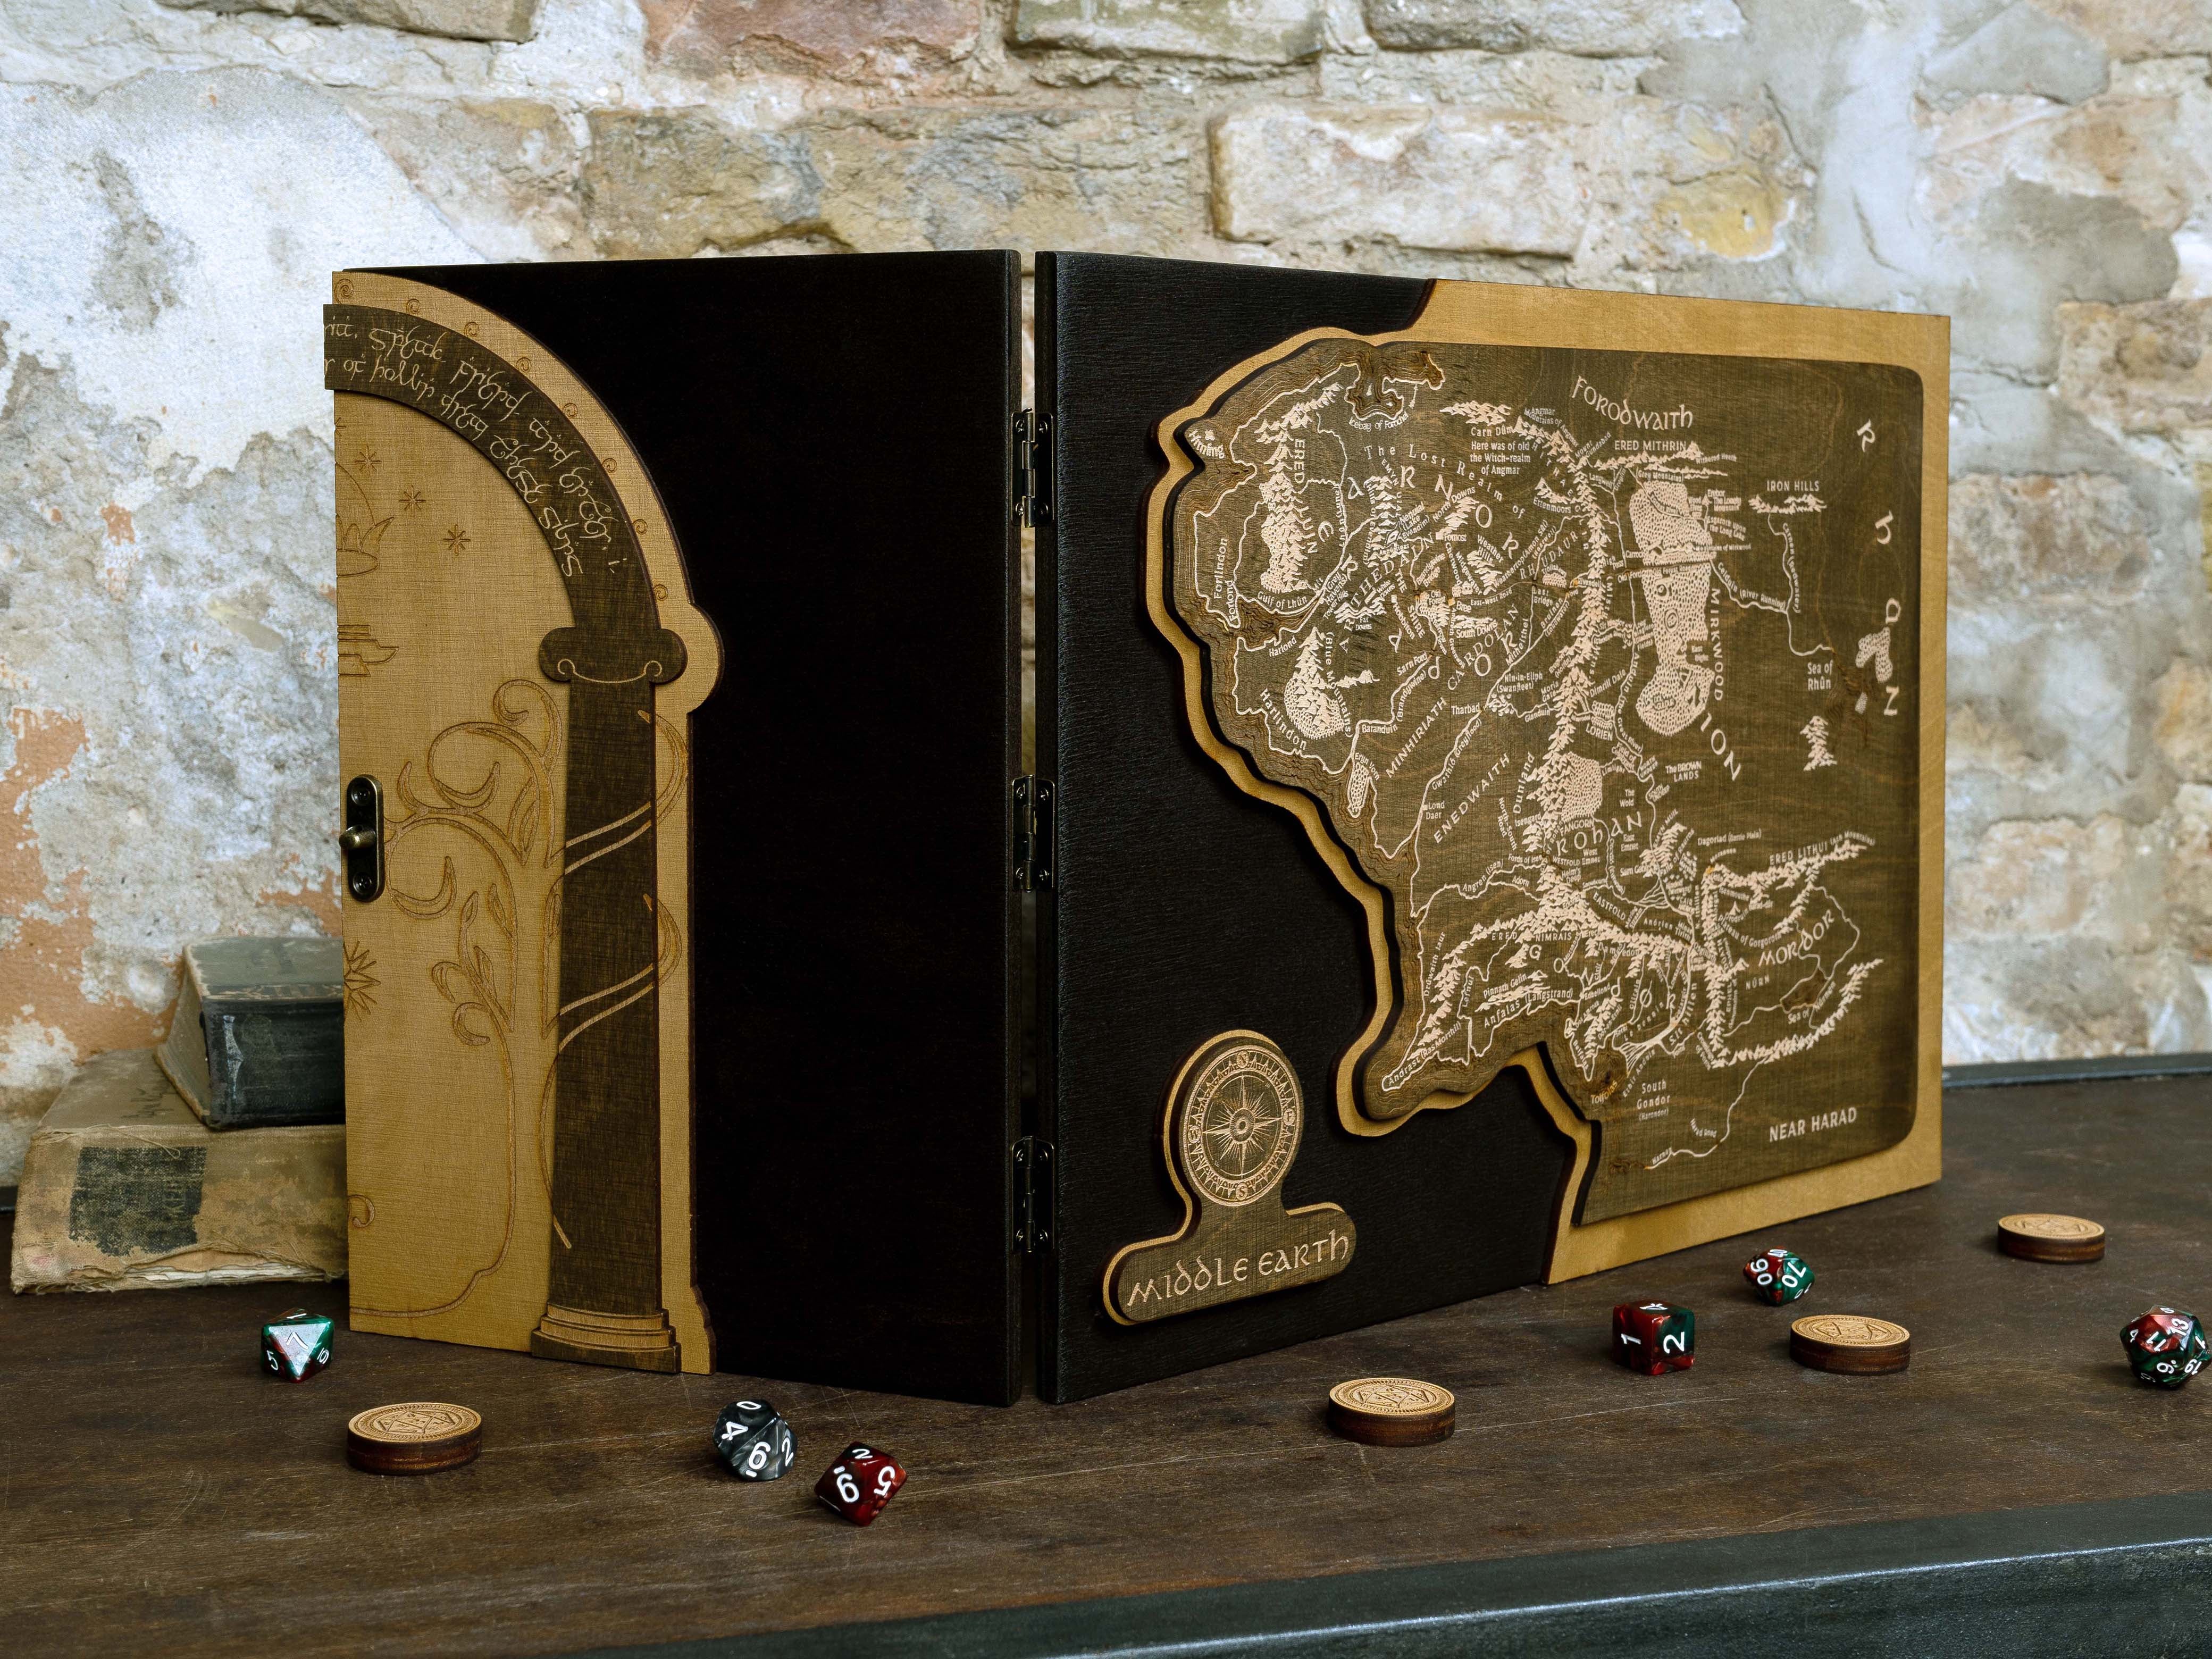 Lord of the Rings Map Dungeon Master screen with magnets, Dungeon master screens - GravisCup